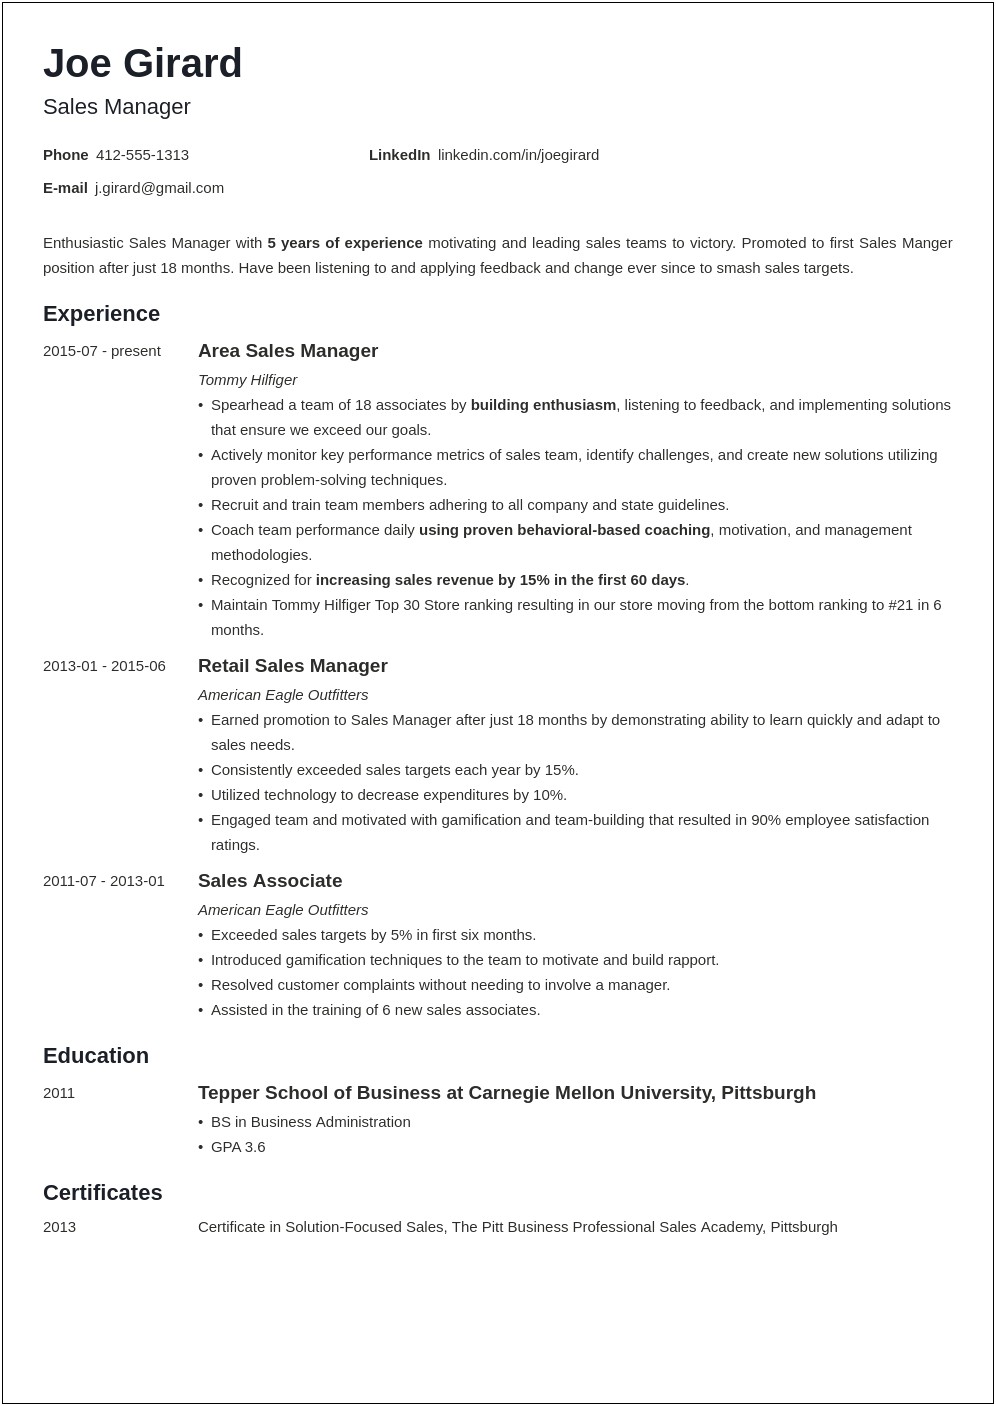 Resume Of Area Sales Manager Fmcg In India